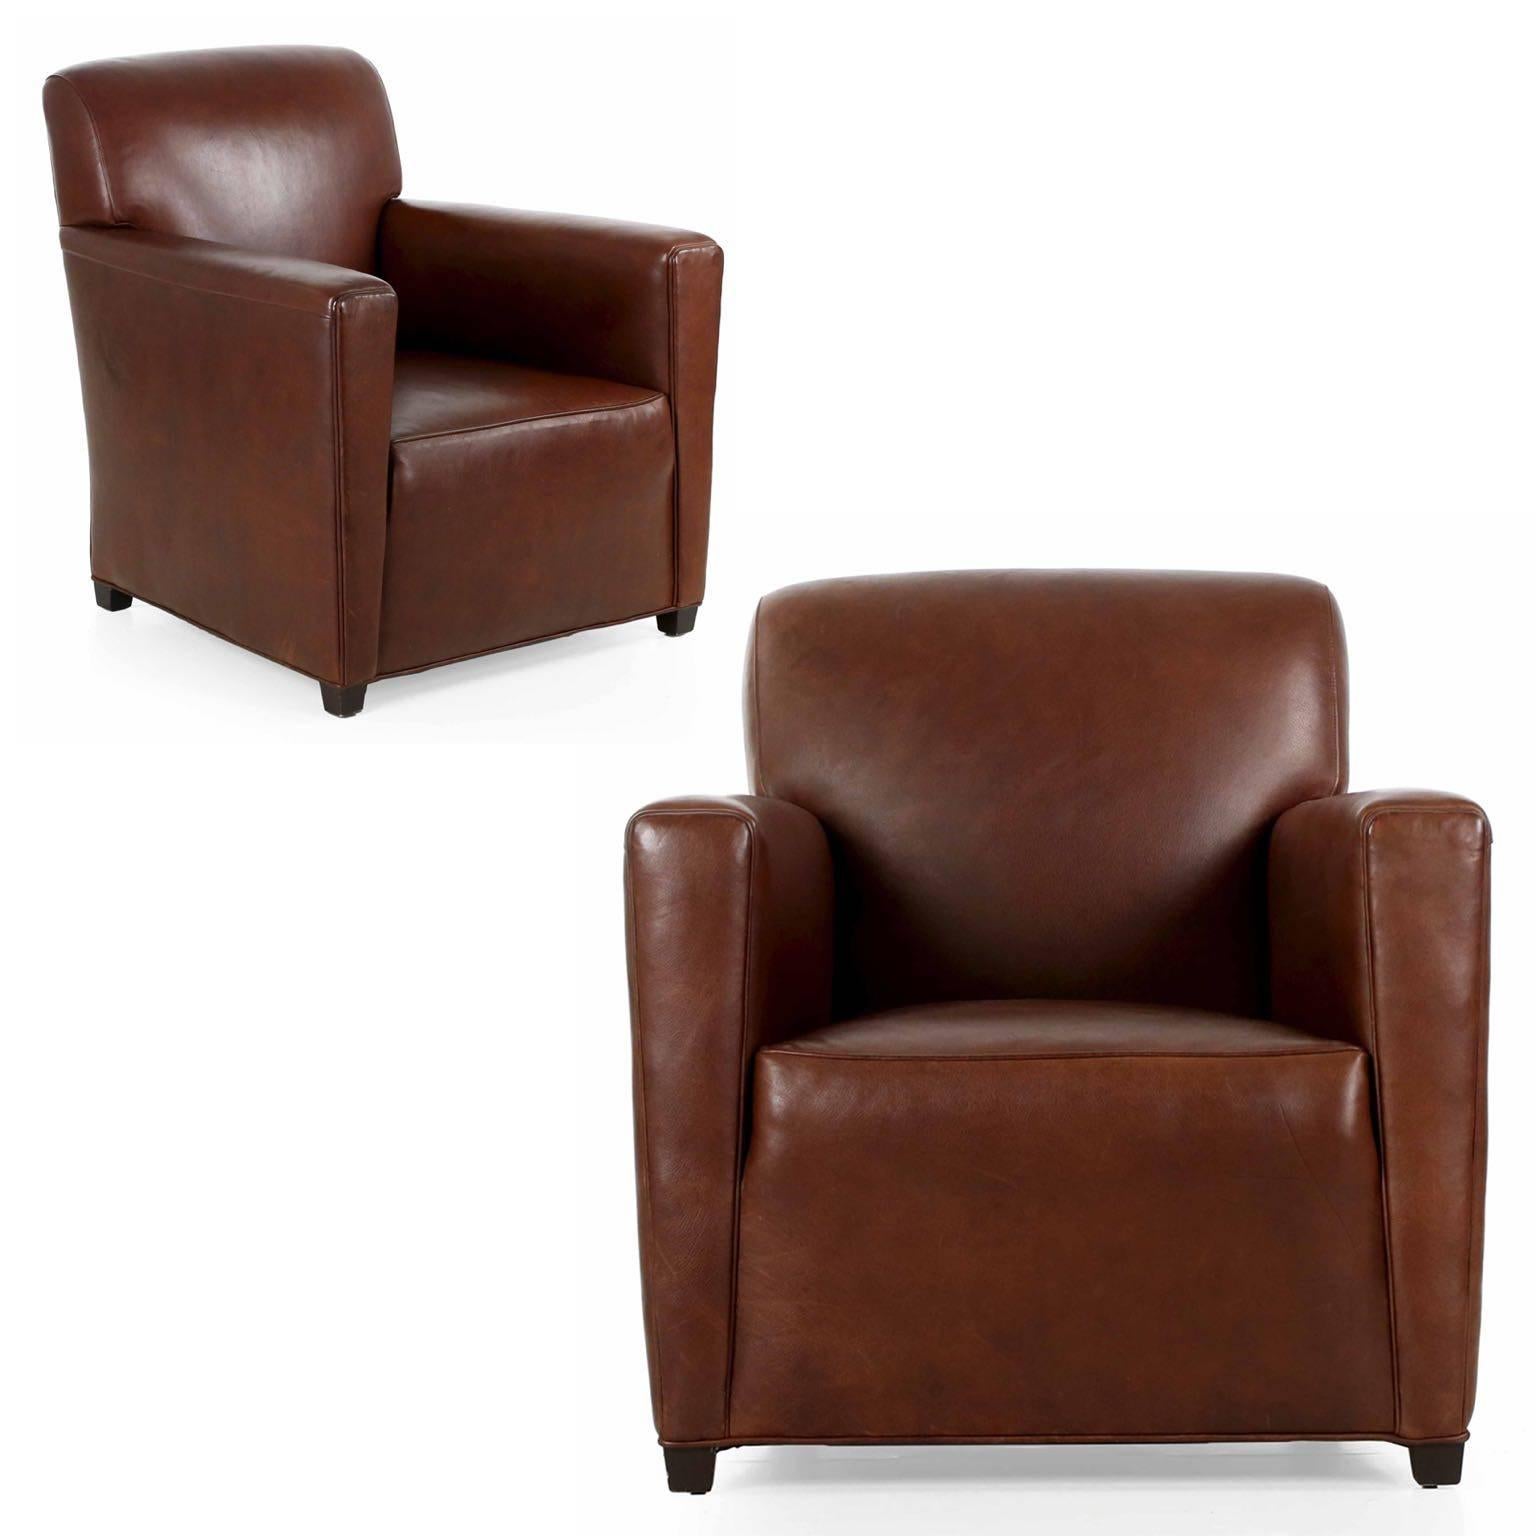 This pair of club chairs were designed with a nod to the elegance of the Art Deco era, with the attached back and seat presenting a unified, crisply tailored appearance. The tight back rests on a generous cube seat, defined by slight welts to accent